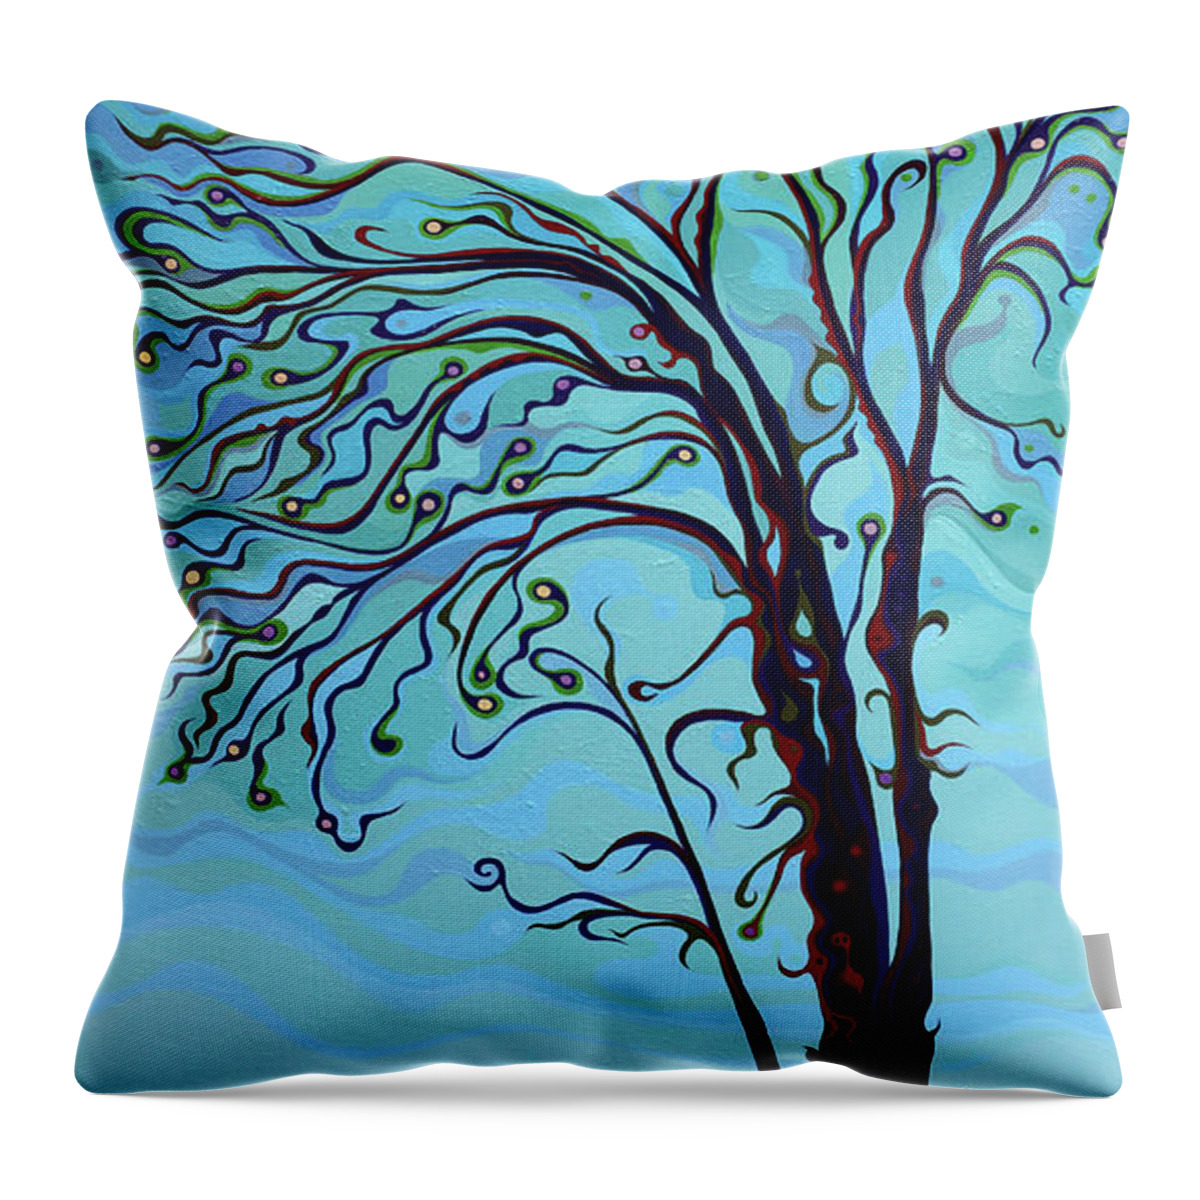 Tree Throw Pillow featuring the painting I Am Tremendous by Amy Ferrari